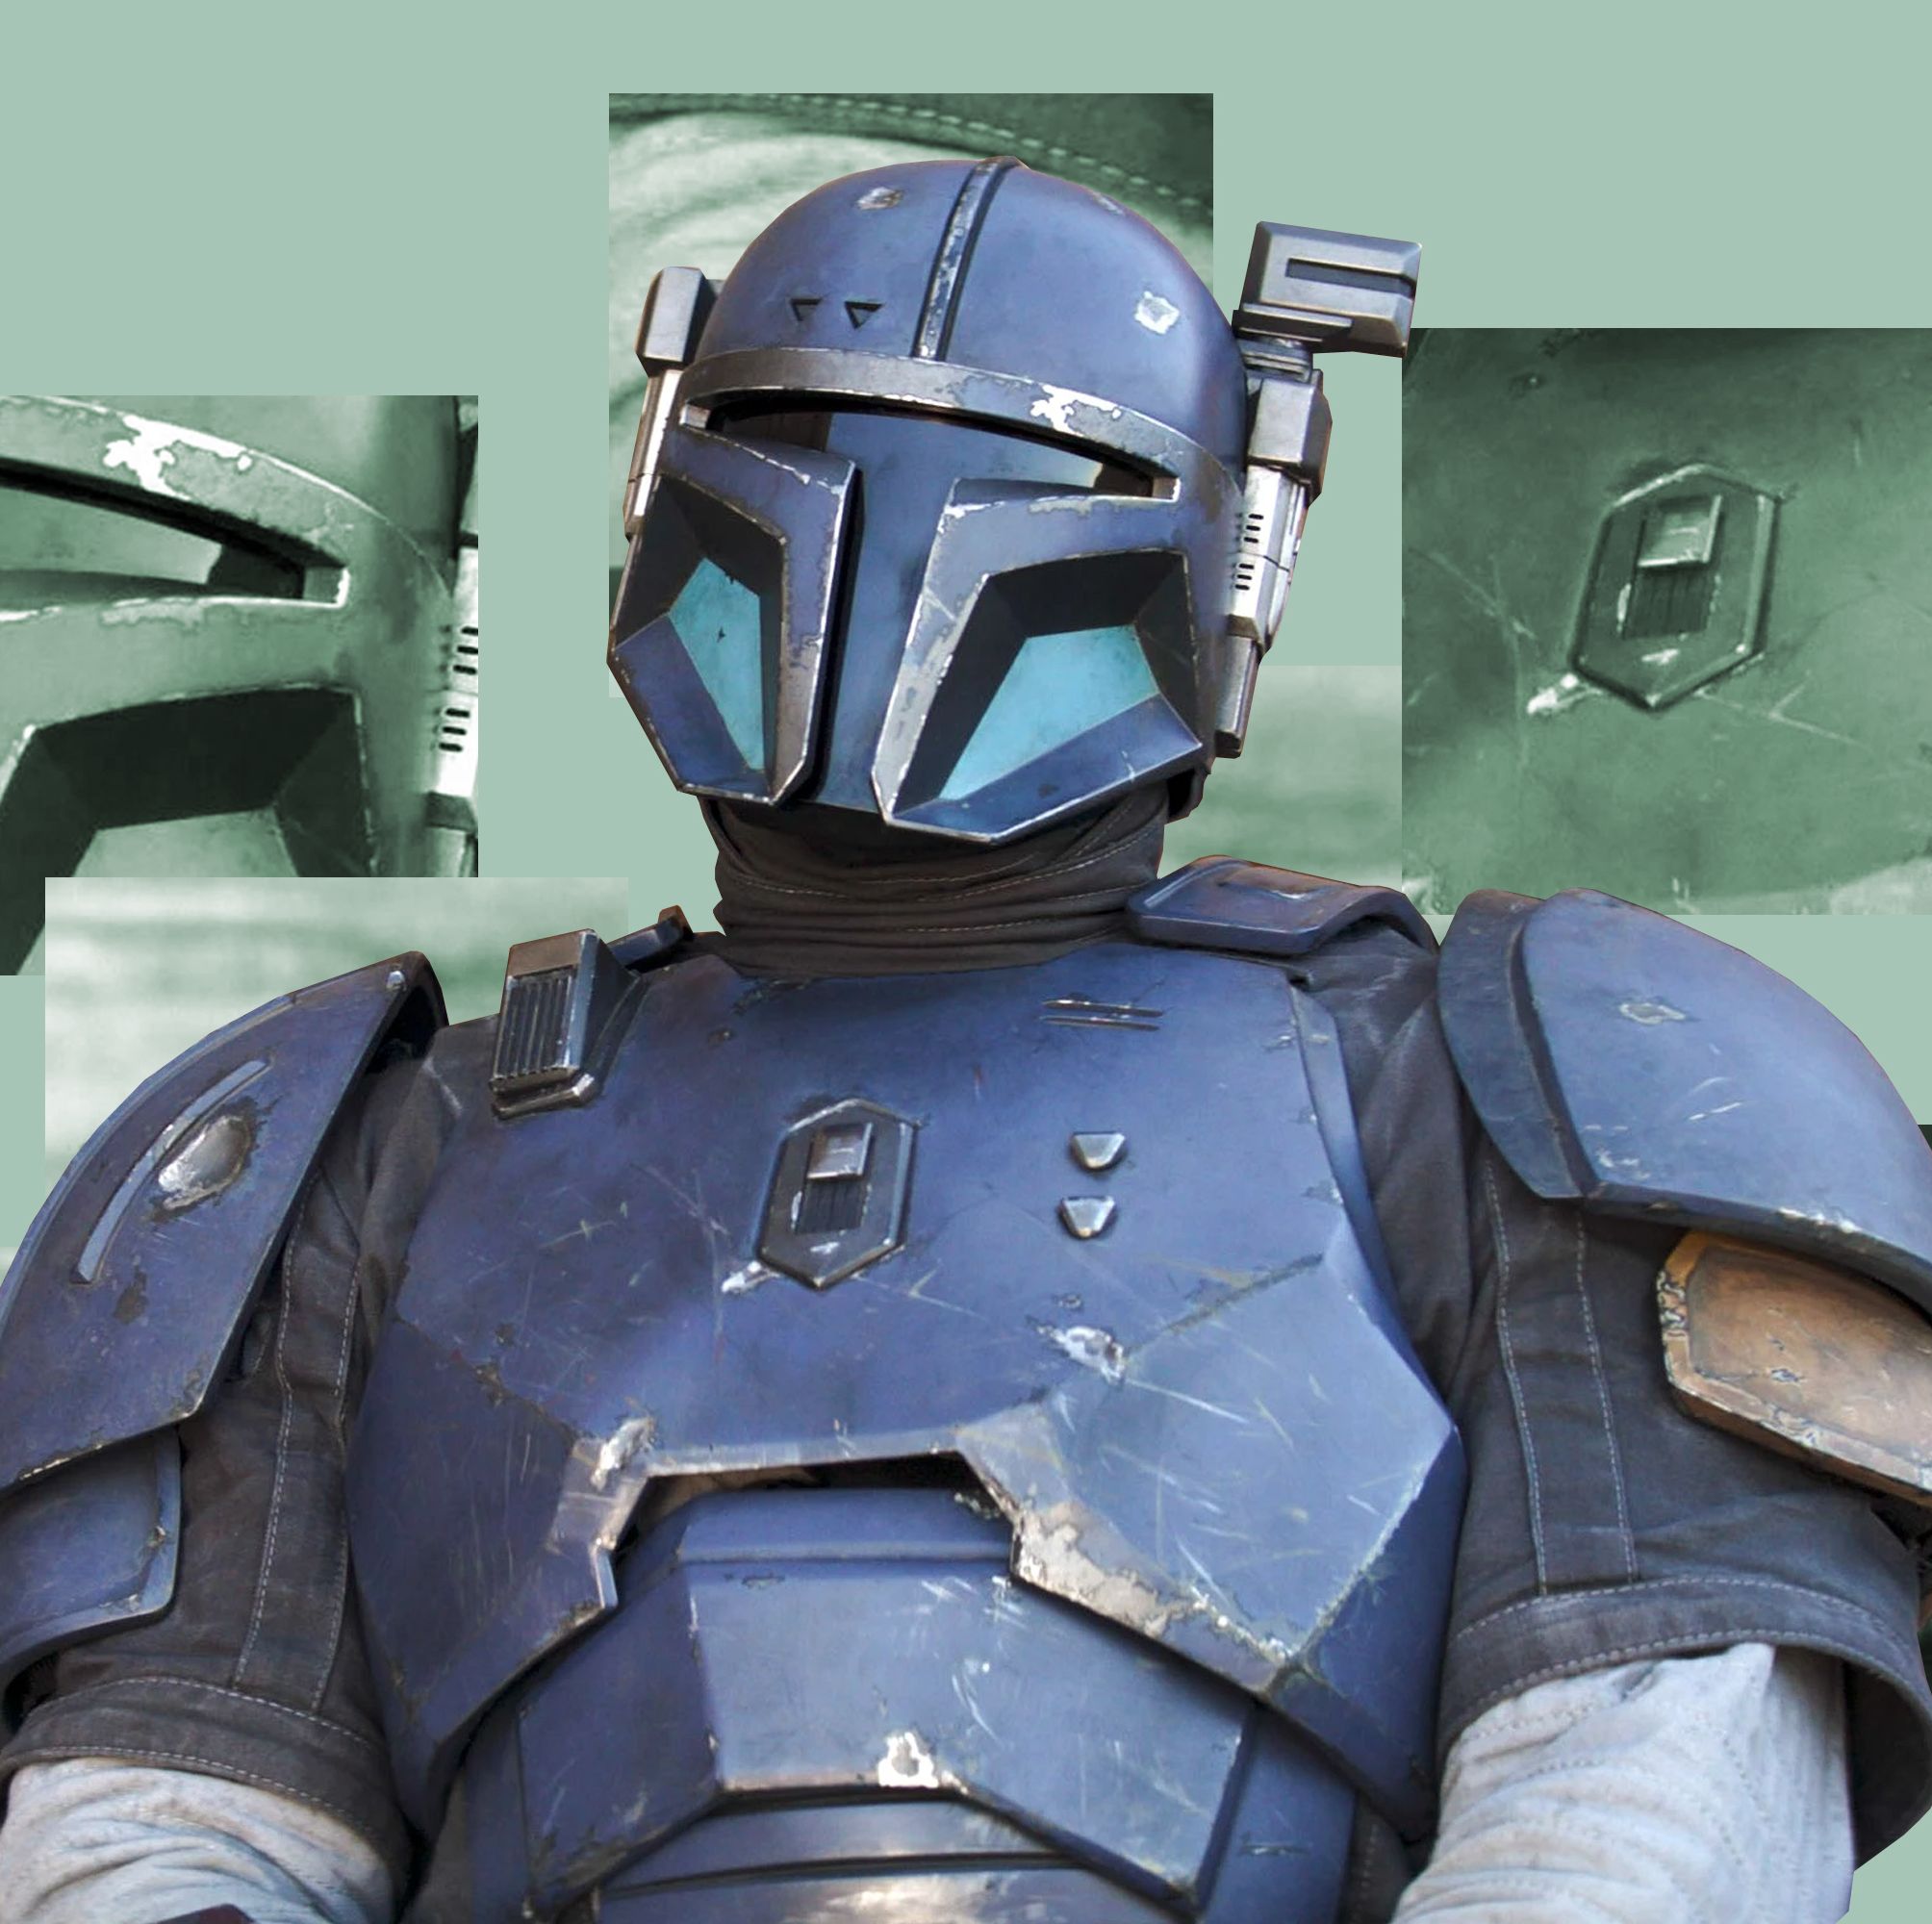 I'm Gonna Say It: 'The Mandalorian' Has Lost the Way